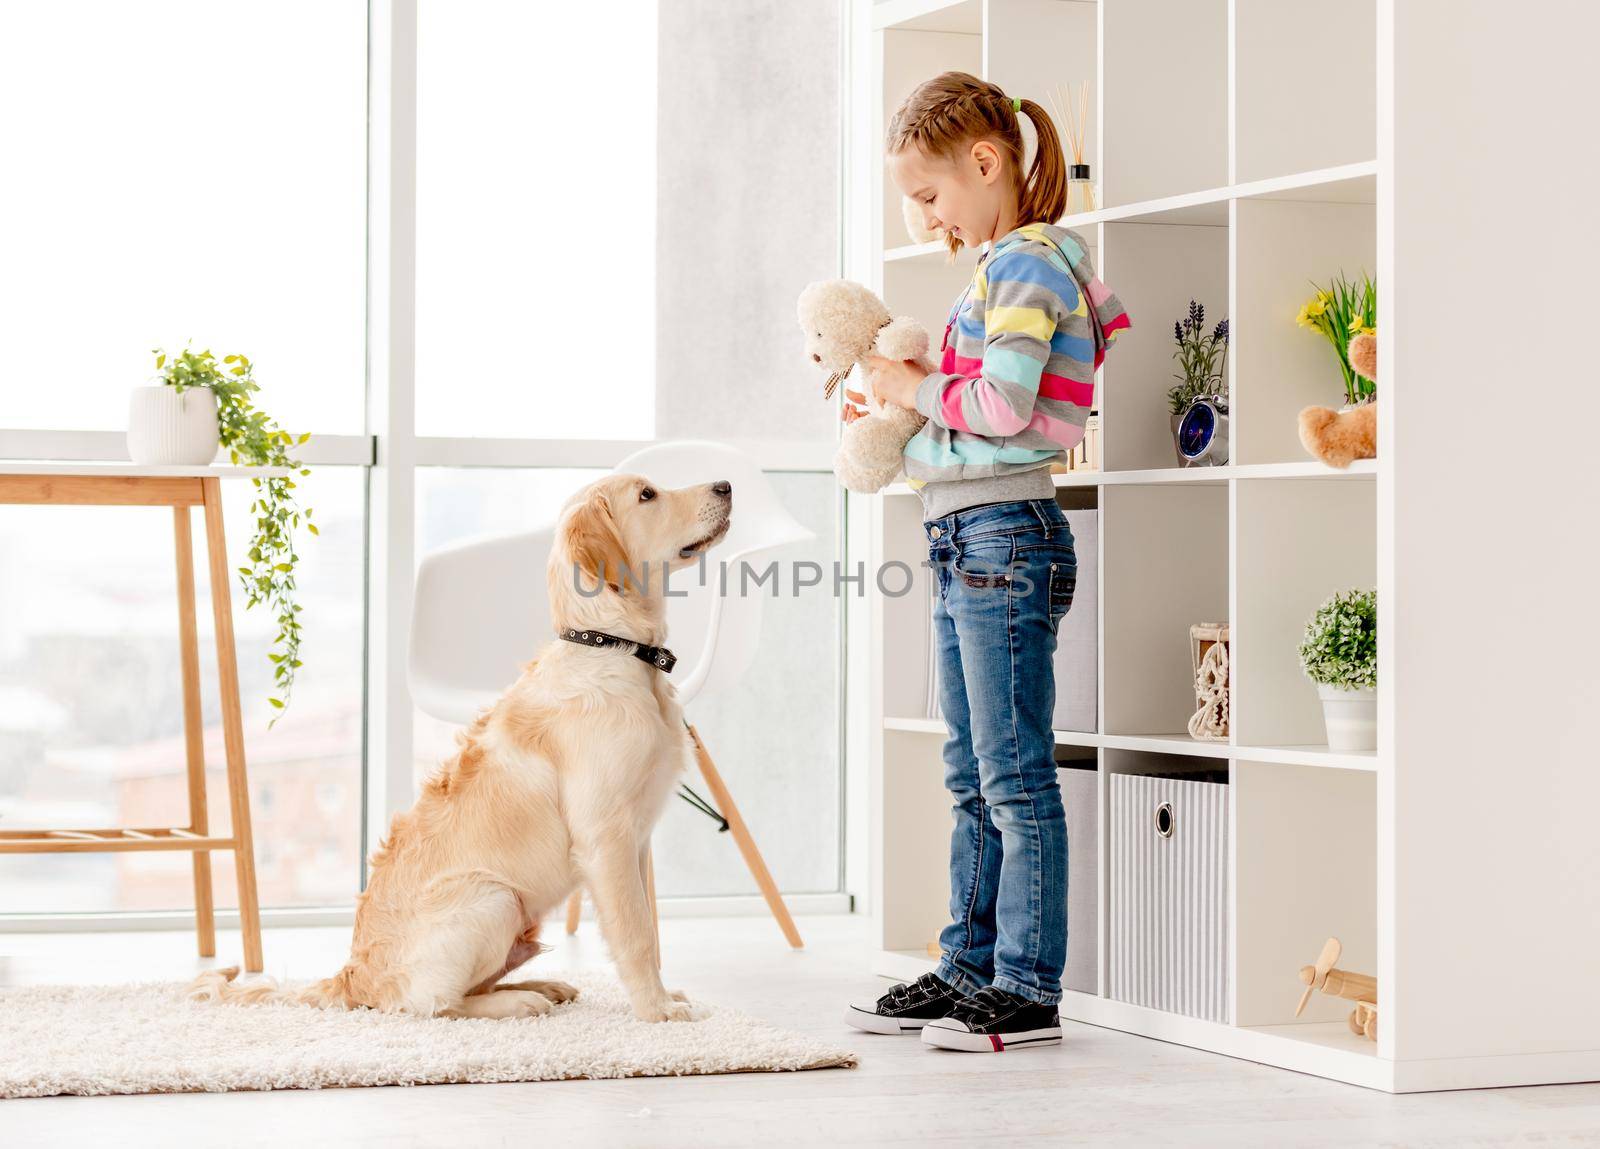 Cute little girl showing teddy bear to adorable young dog